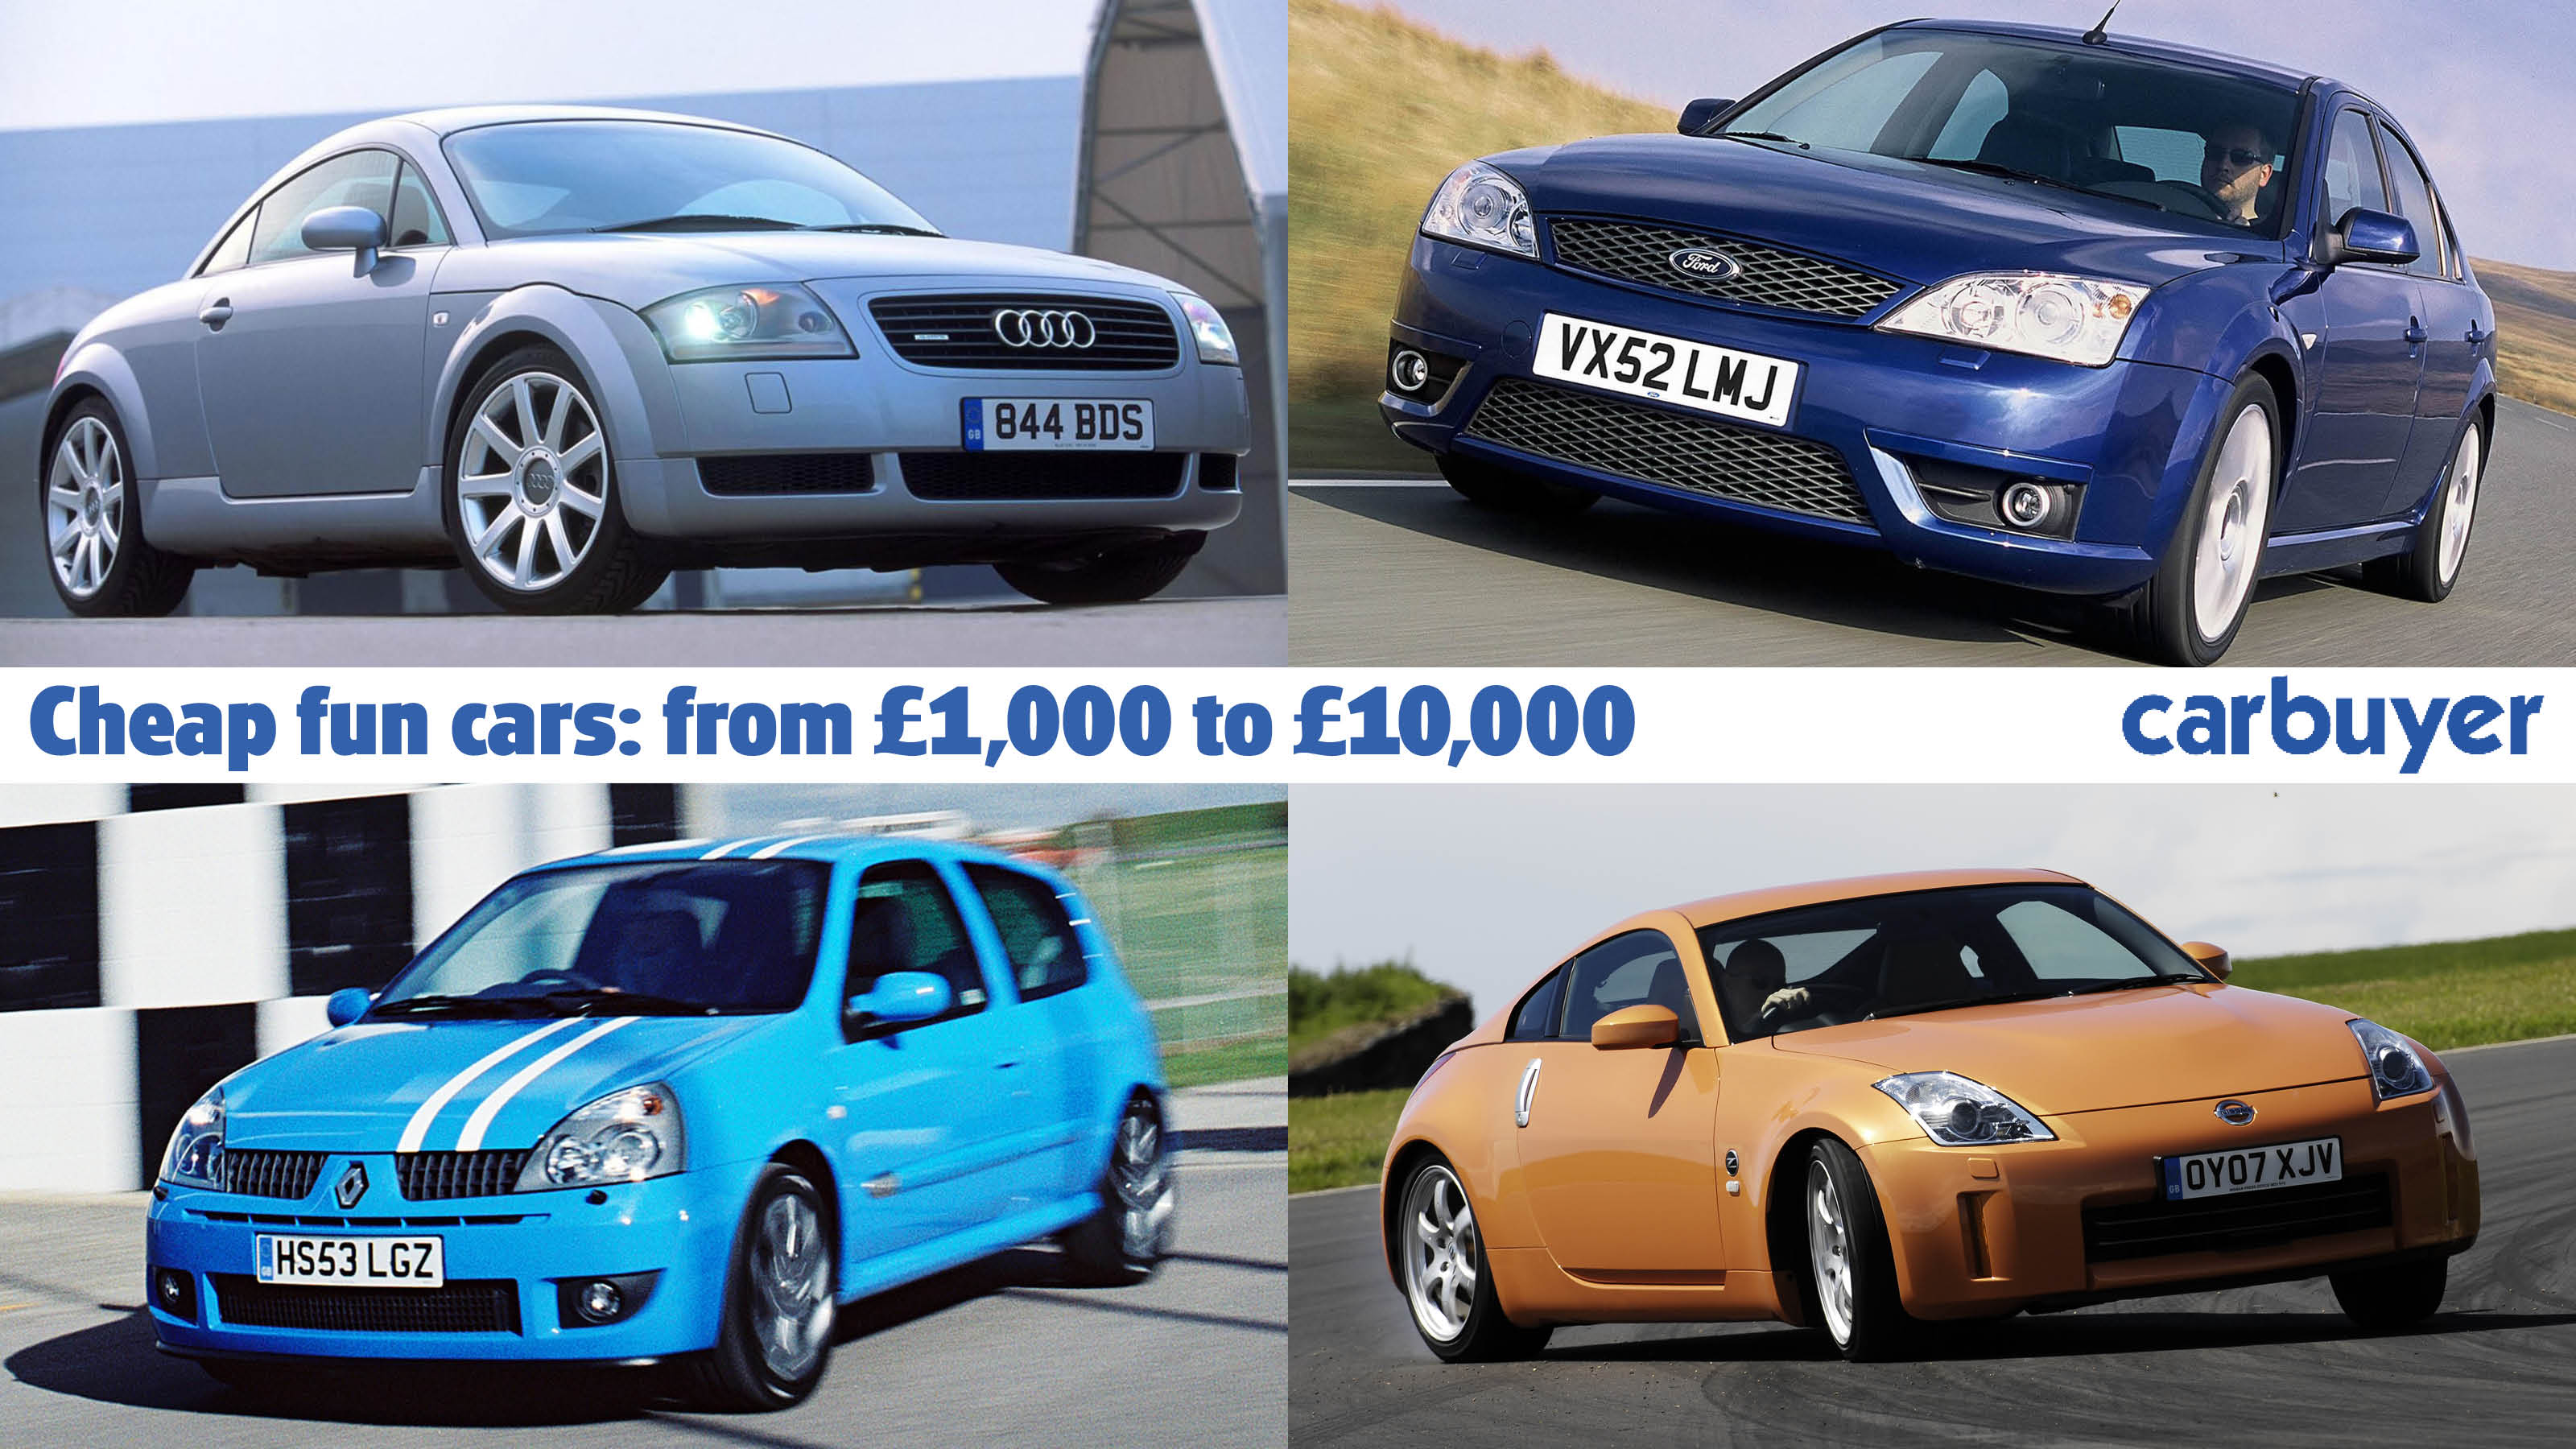 Cheap fun cars: our used sporty car picks from £1,000 to £10,000 | Carbuyer